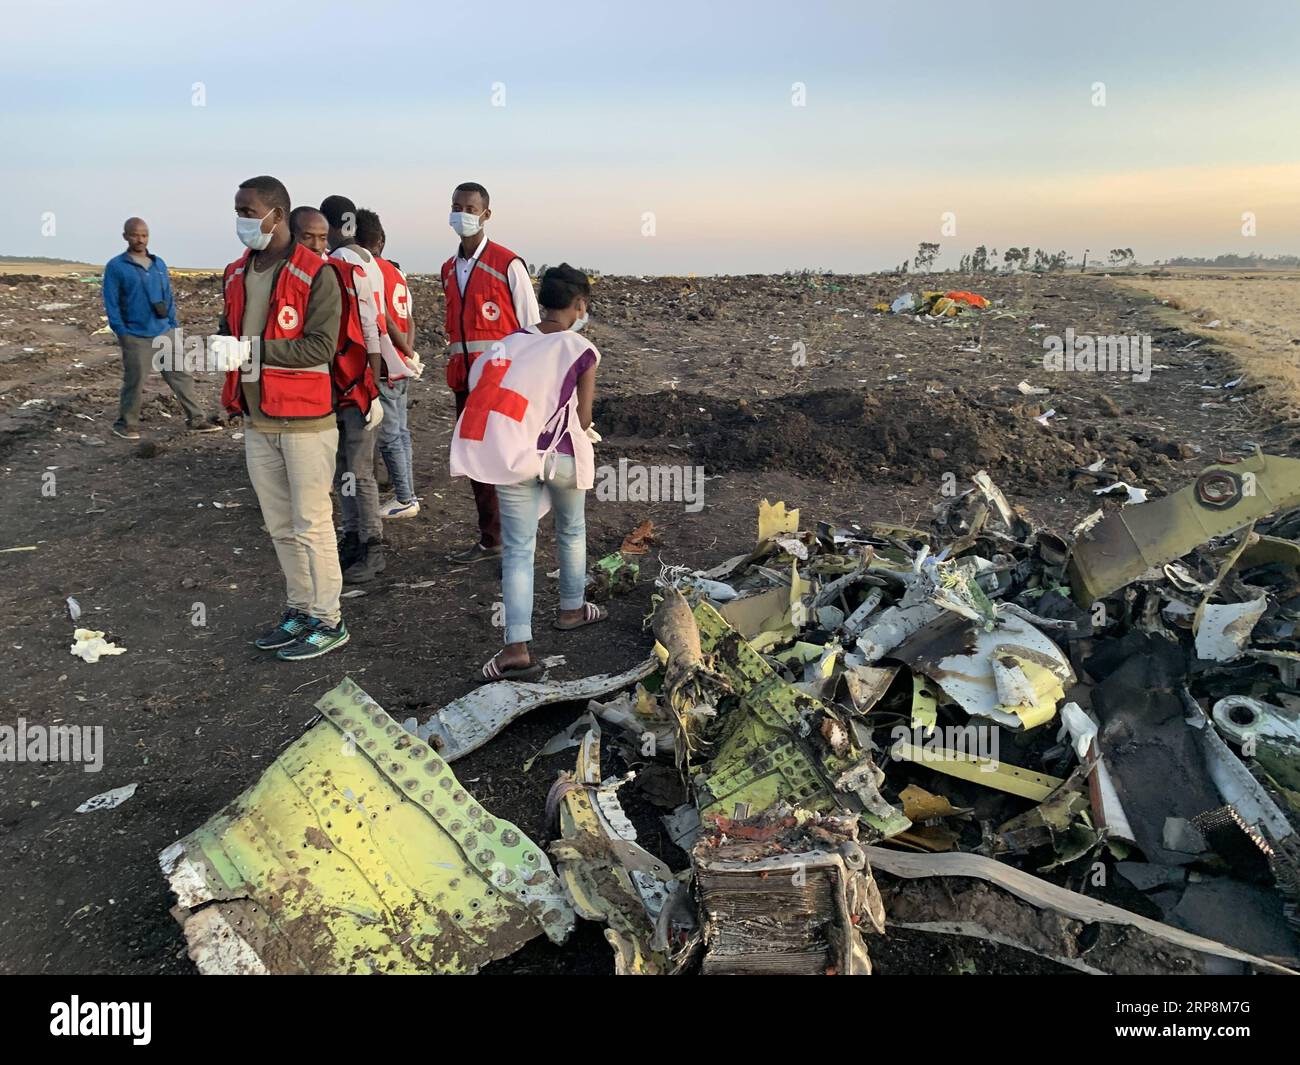 (190311) -- BEIJING, March 11, 2019 (Xinhua) -- Rescuers work beside the wreckage of an Ethiopian Airlines aircraft at the crash site, some 50 km east of Addis Ababa, capital of Ethiopia, on March 10, 2019. All 157 people aboard Ethiopian Airlines flight were confirmed dead as Africa s fastest growing airline witnessed the worst-ever incident in its history. The incident on Sunday, which involved a Boeing 737-800 MAX, occurred a few minutes after the aircraft took off from Addis Ababa Bole International Airport to Nairobi, Kenya. It crashed around Bishoftu town, the airline said. (Xinhua/Wang Stock Photo